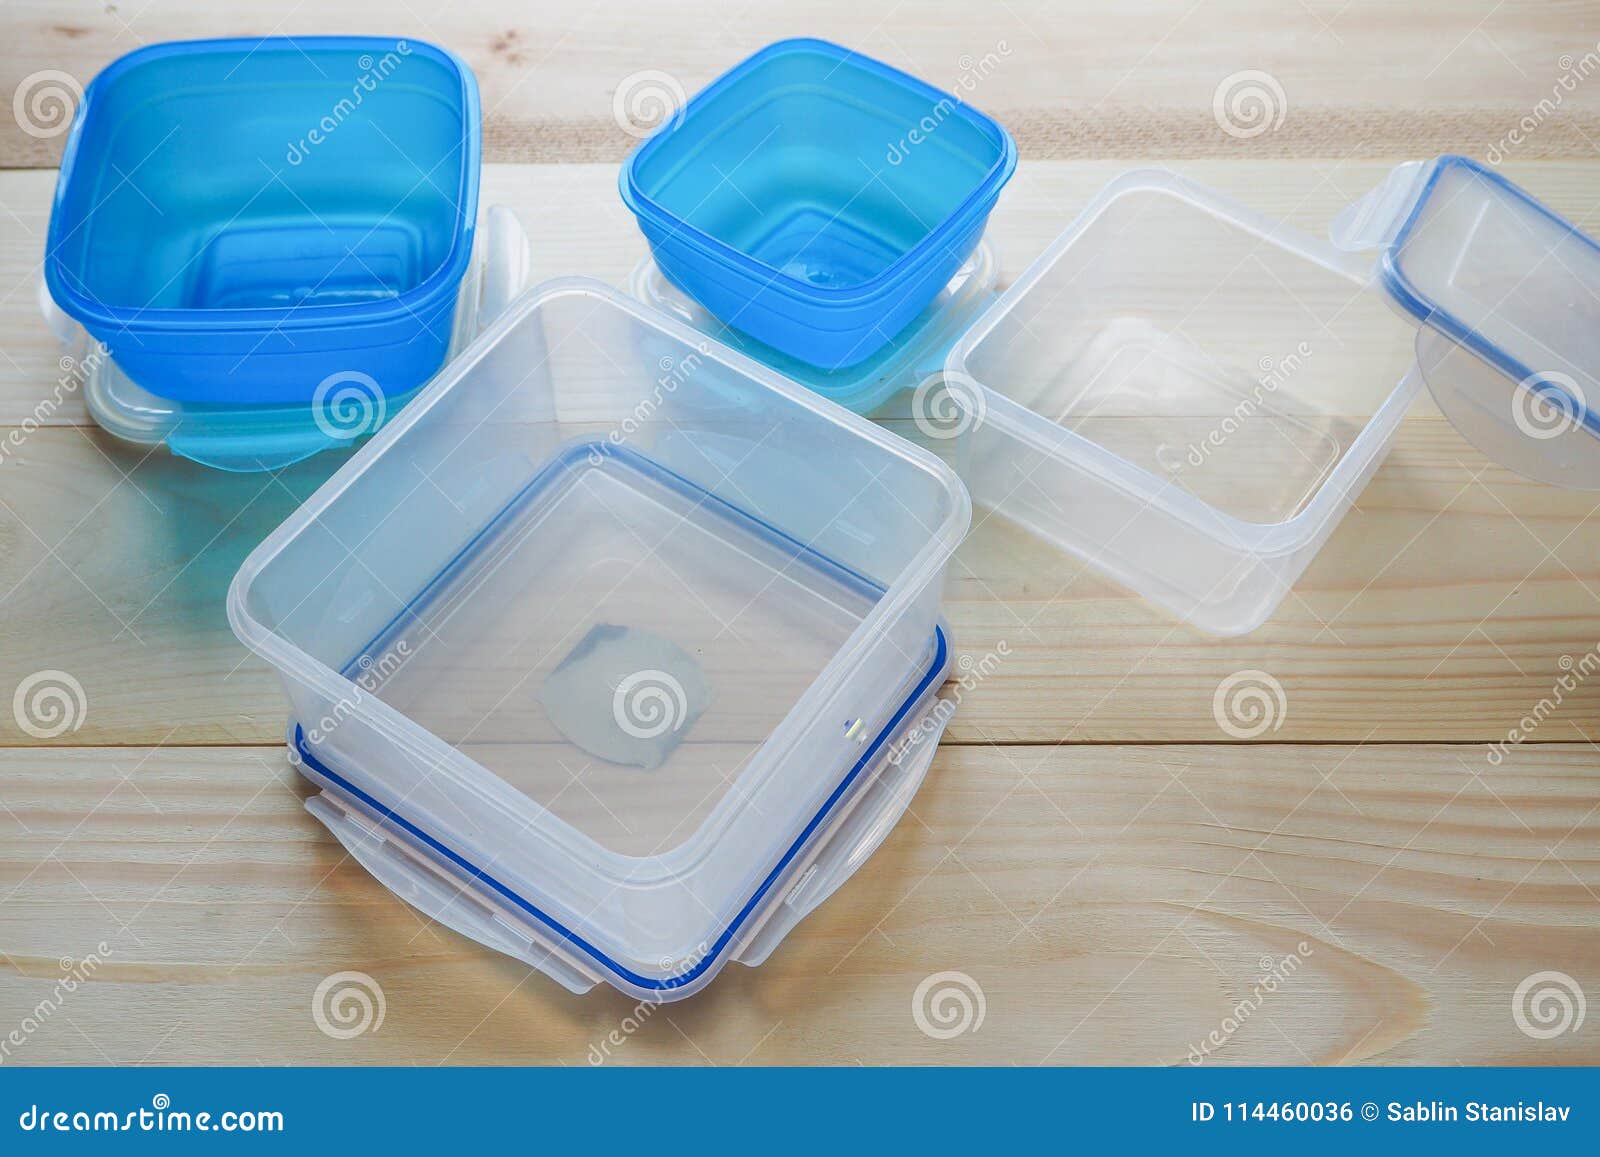 Are Plastic Boxes Good for Long-Term Storage?